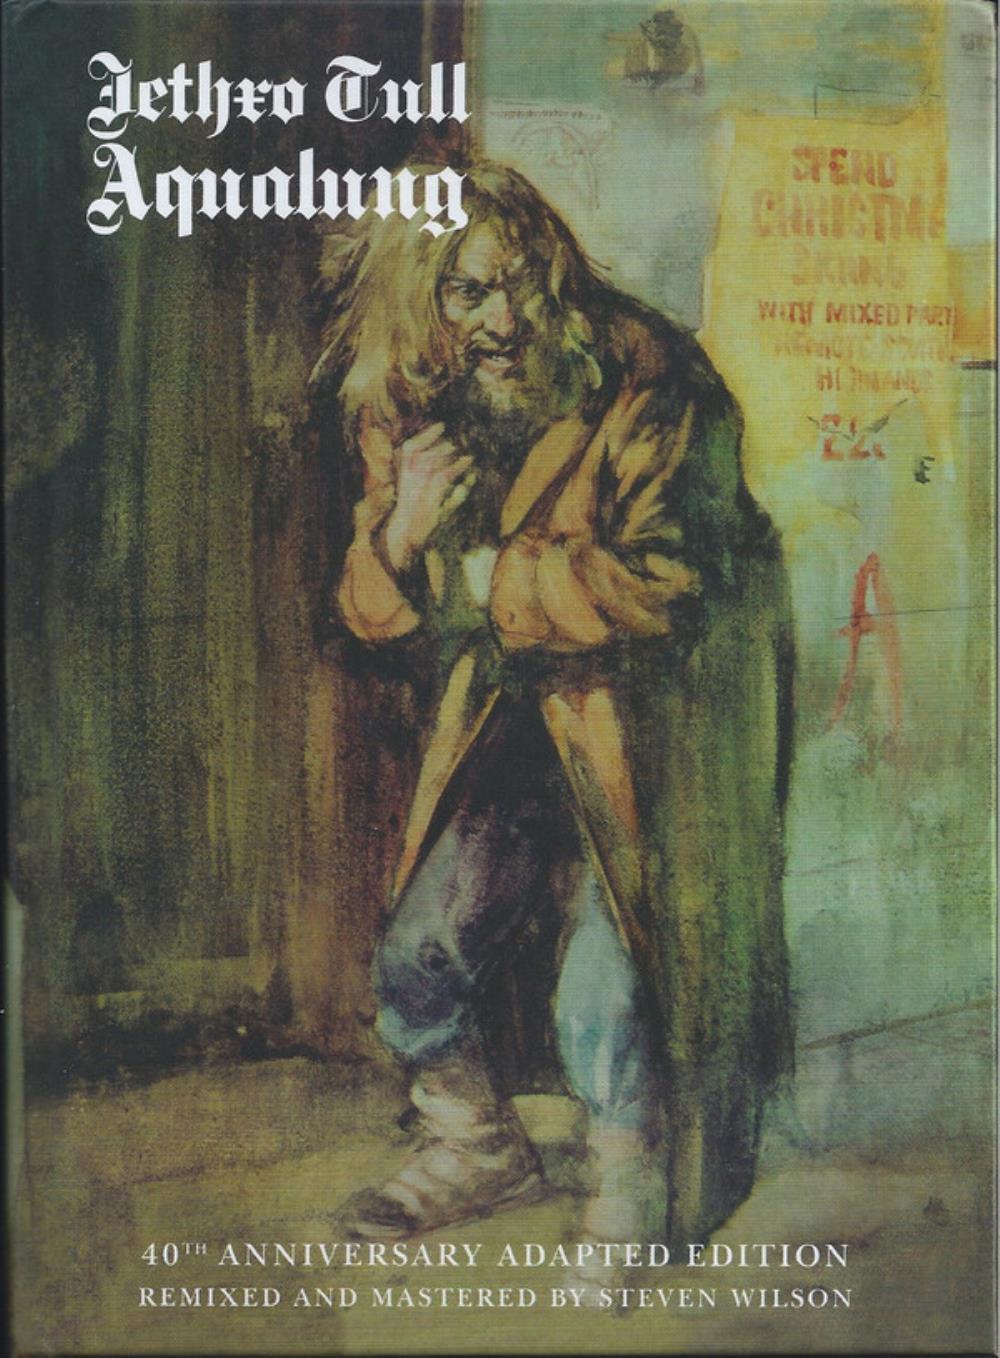 Jethro Tull - Aqualung - 40th Anniversary Adapted Edition CD (album) cover